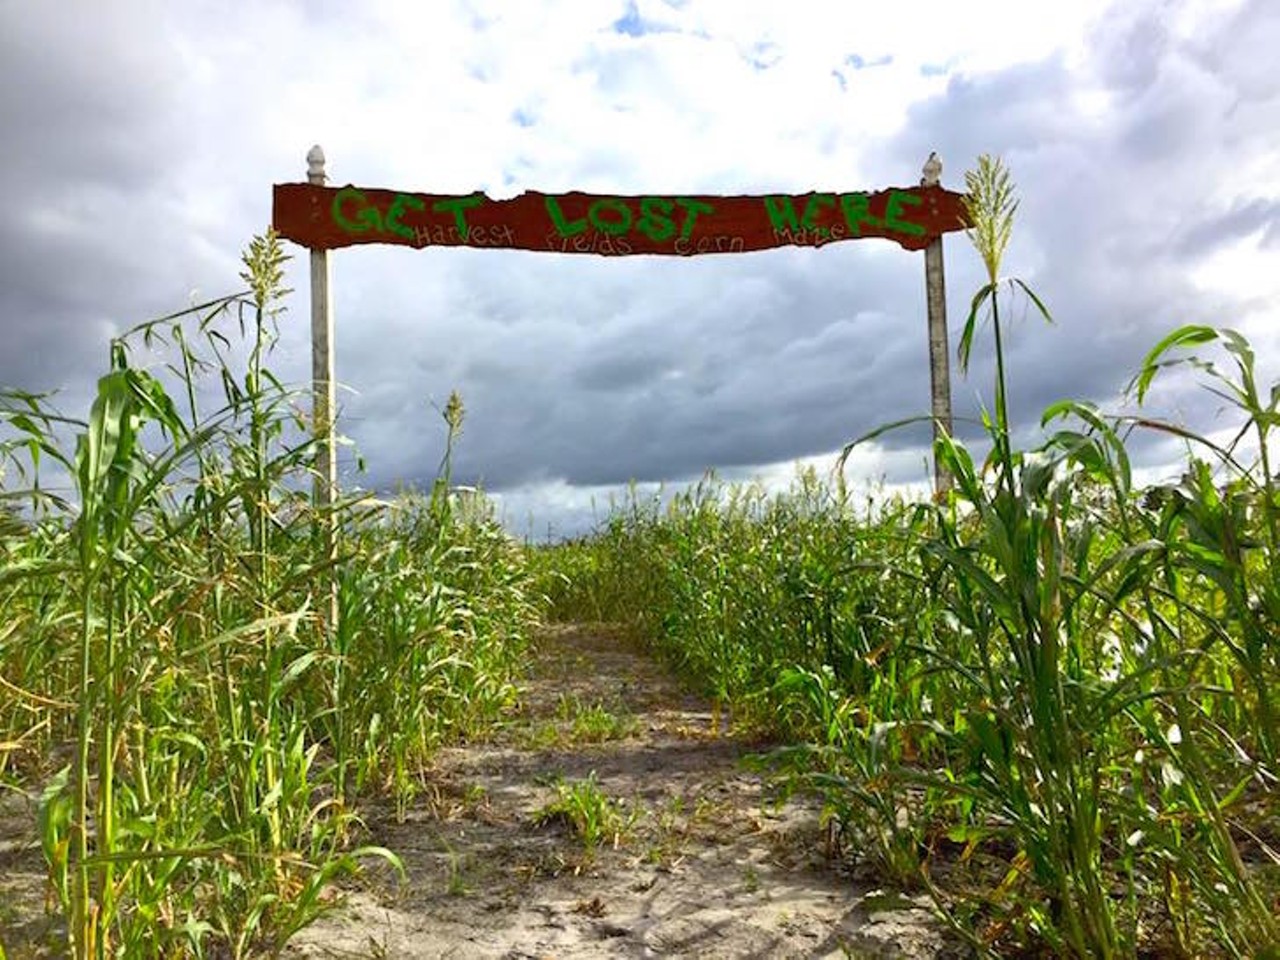 Harvest Fields Corn Maze
2594 LPGA Blvd., Daytona Beach, 386-801-1810
Harvest Fields is giving you the chance to test your escape abilities in the light and dark on weekends from Oct. 7 - 29. Daytime mazes are open Saturdays from 10 a.m. - 5 p.m. and Sundays 11 a.m. - 5 p.m. This year the farm has also opened a flashlight maze on Friday and Saturday nights from dusk to 10 p.m. If you attended last year, you&#146;ll need to enter a new address into your GPS, as the event has moved to a new larger location. Entry is $10 for all events.
Photo via Harvest Fields Corn Maze